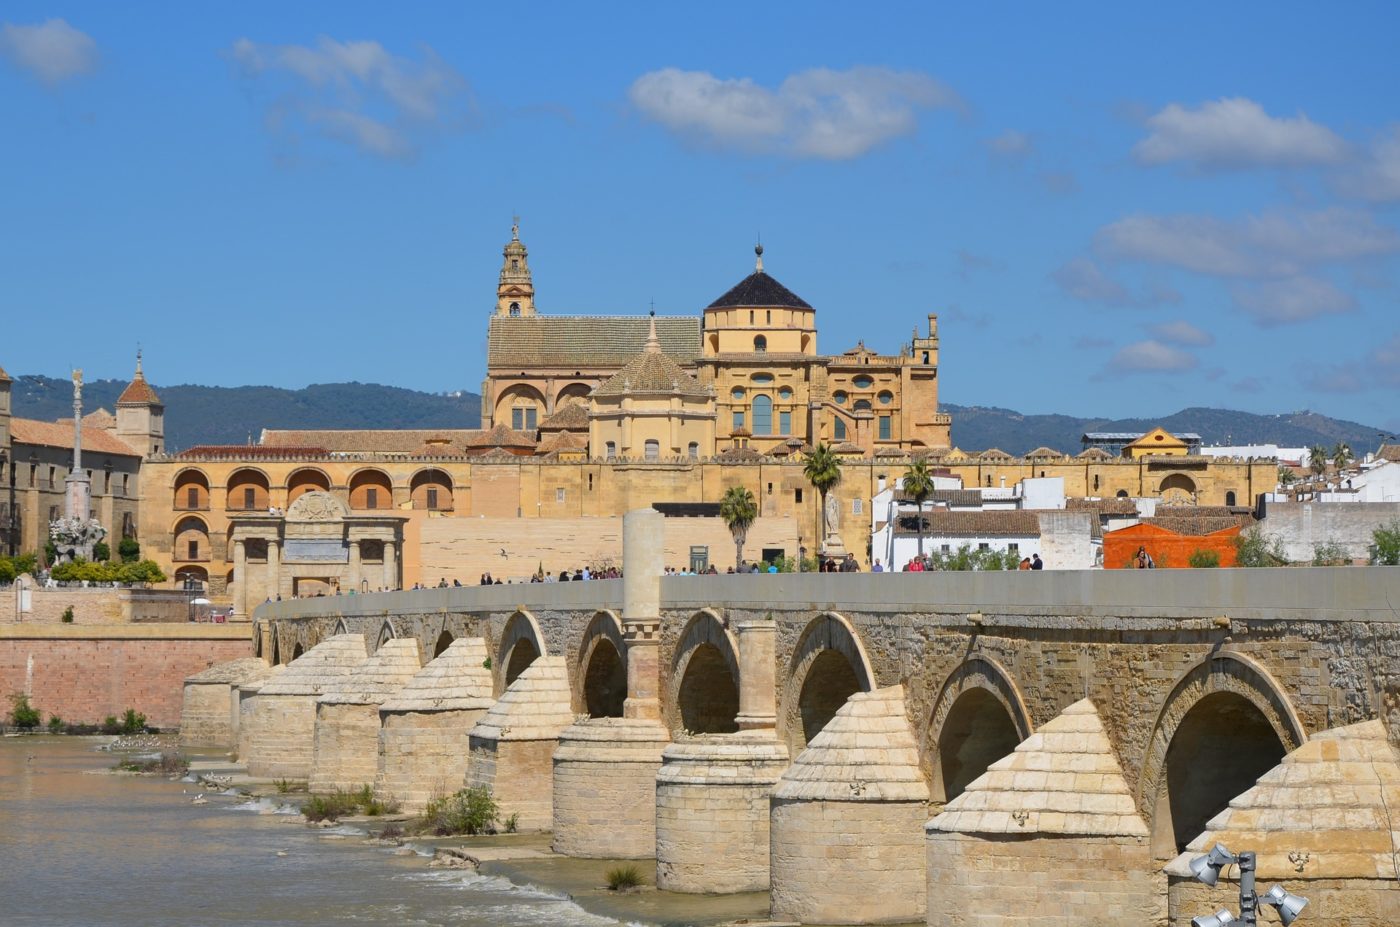 Sights and attractions in Cordoba